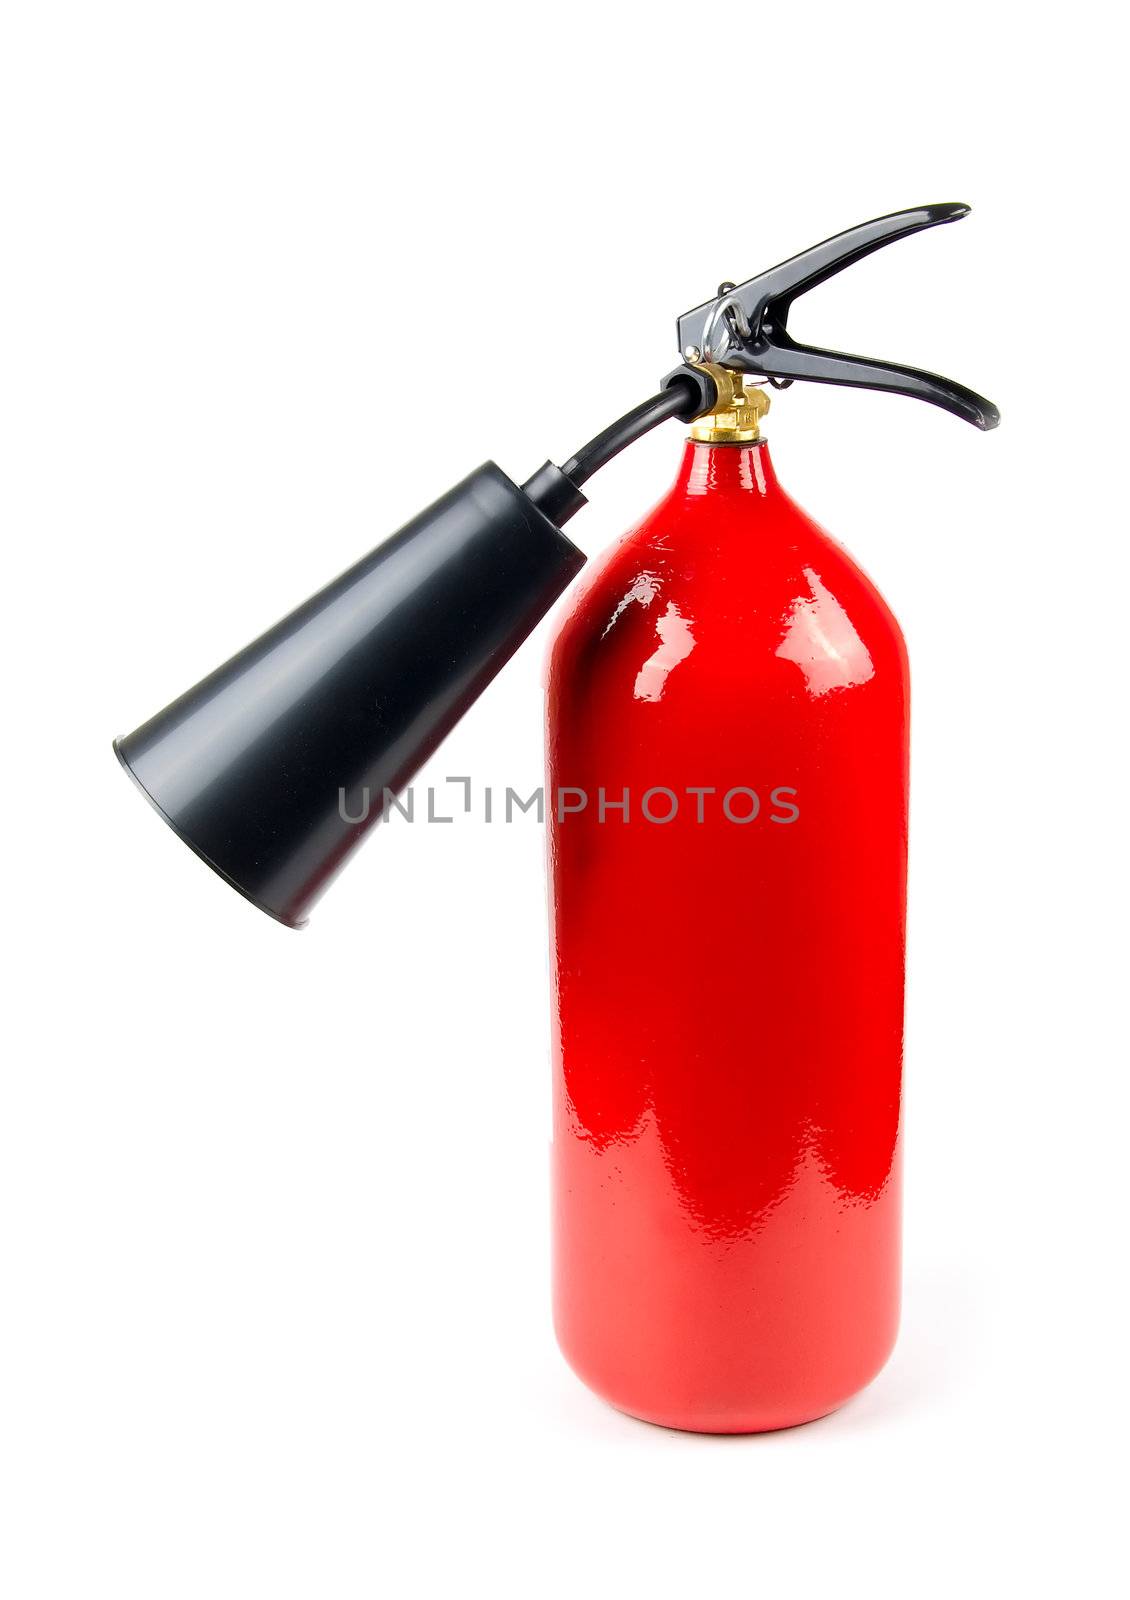 fire extinguisher on a white background